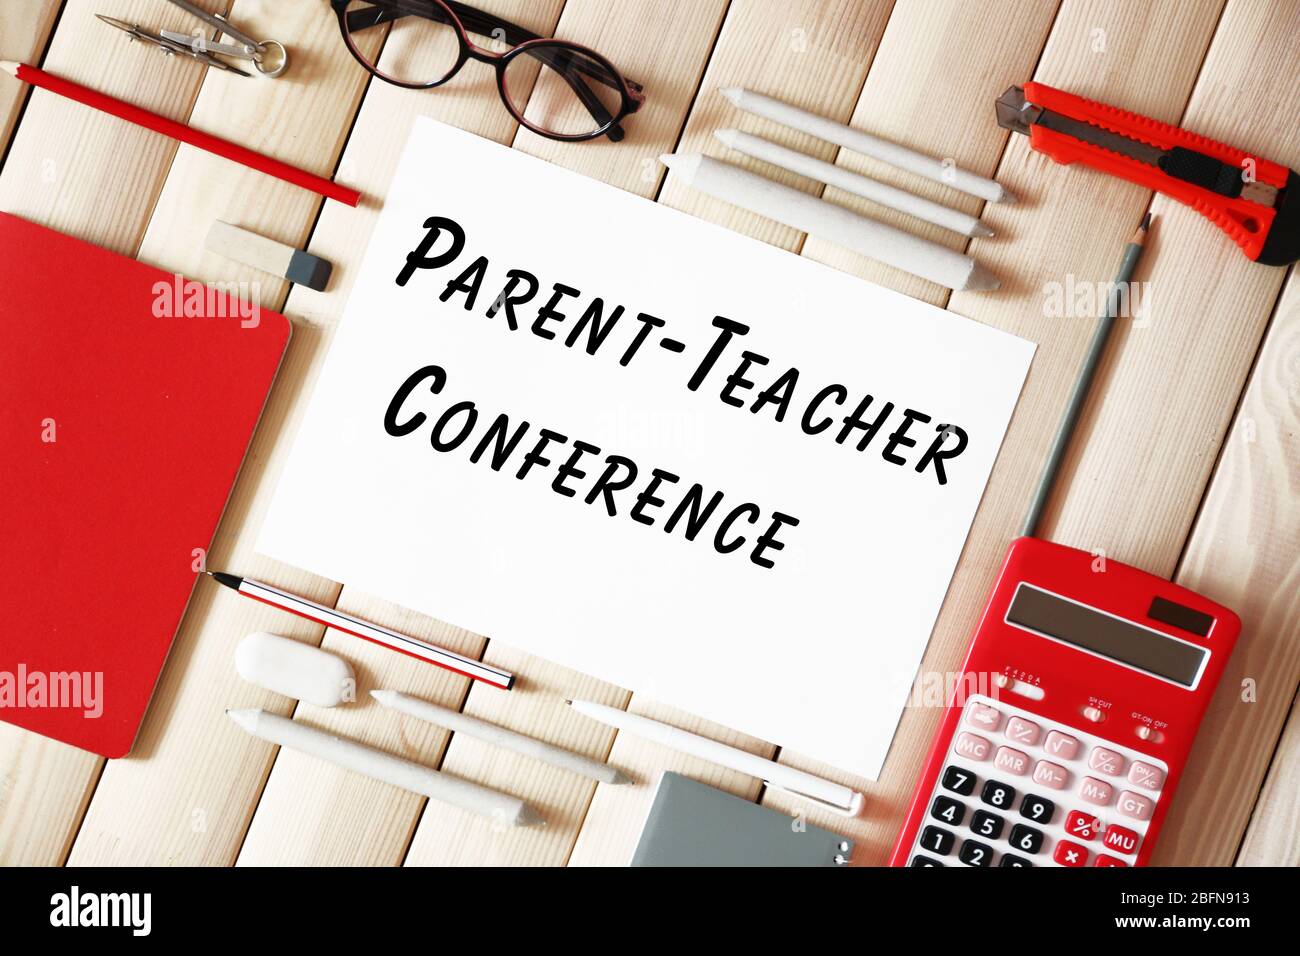 Sheet of paper with text PARENT-TEACHER CONFERENCE and stationery on wooden background. School concept. Stock Photo